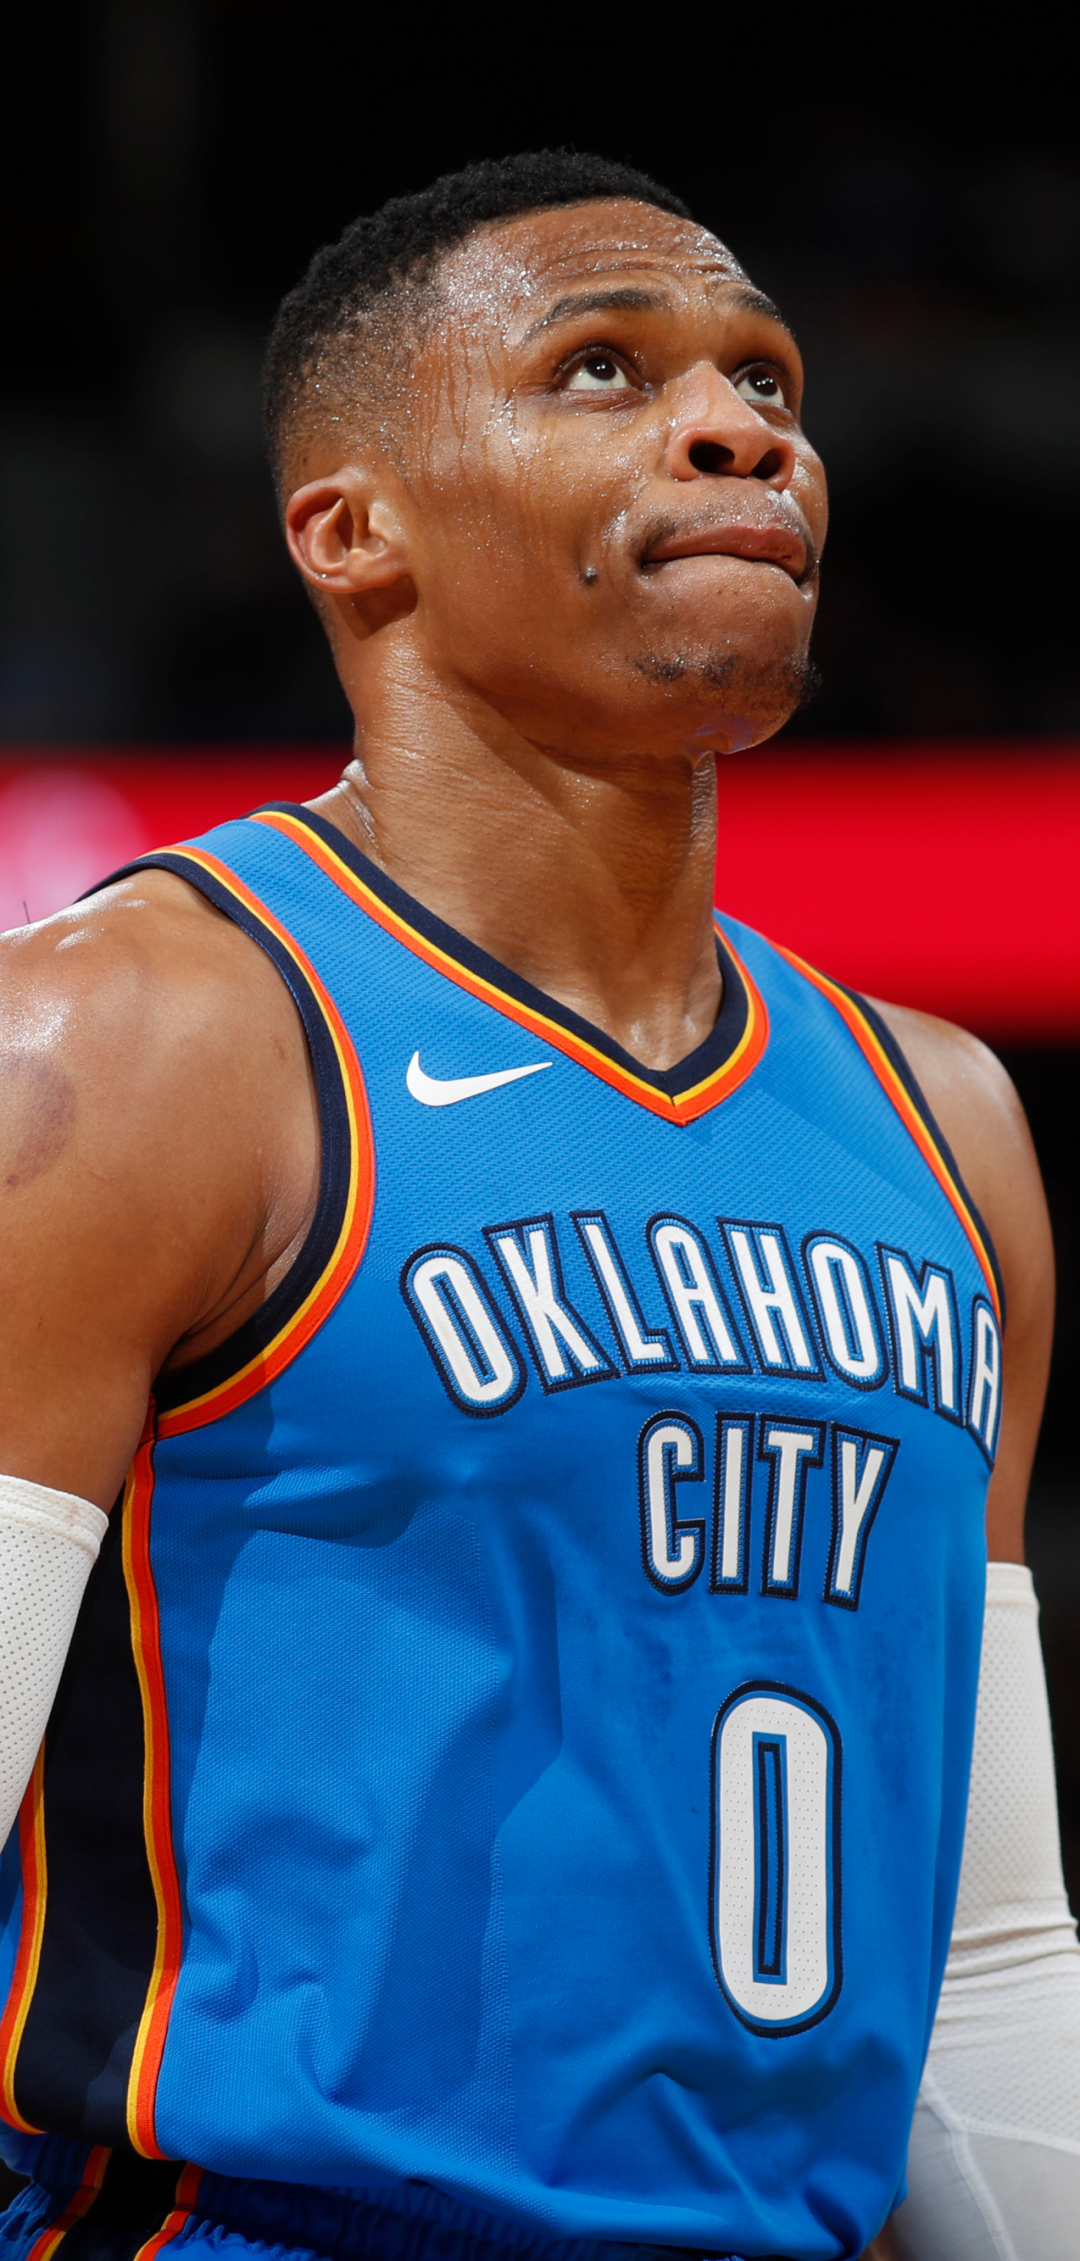 Download Russell Westbrook In Blue Oklahoma Jersey Wallpaper